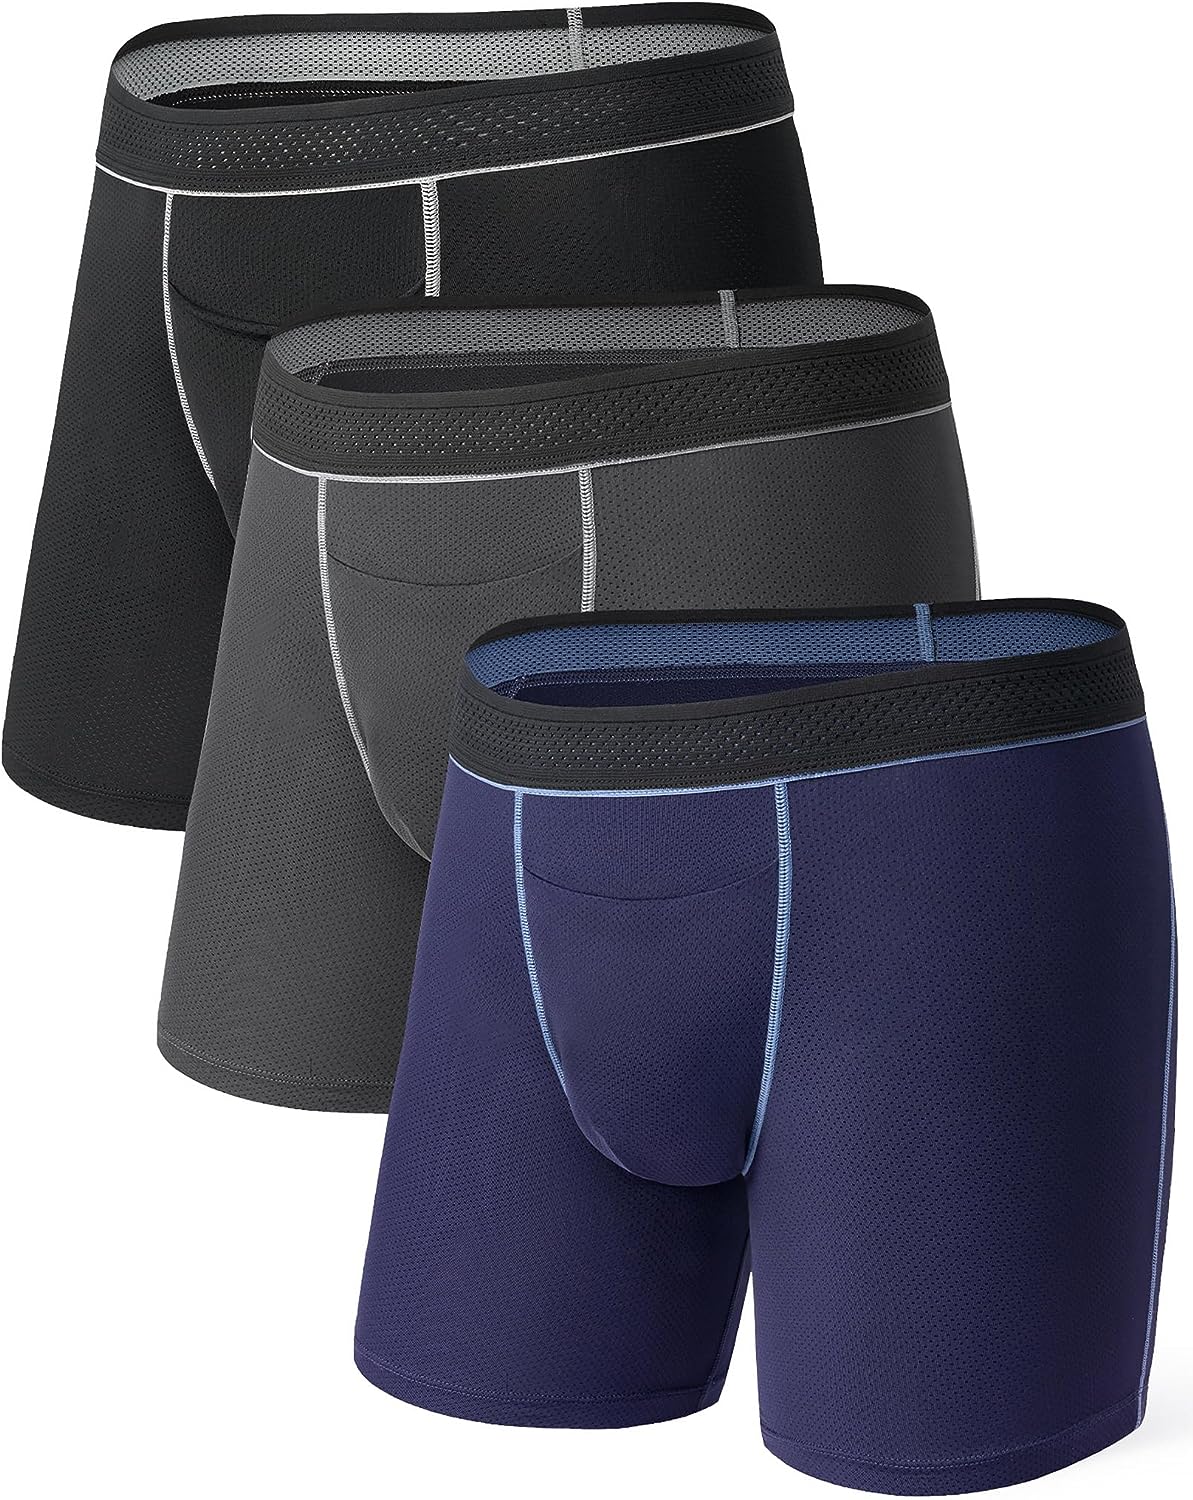 3 Packs Long Boxers Brief Quick Dry Sports David Archy Comfortable  Breathable Underwear For Men